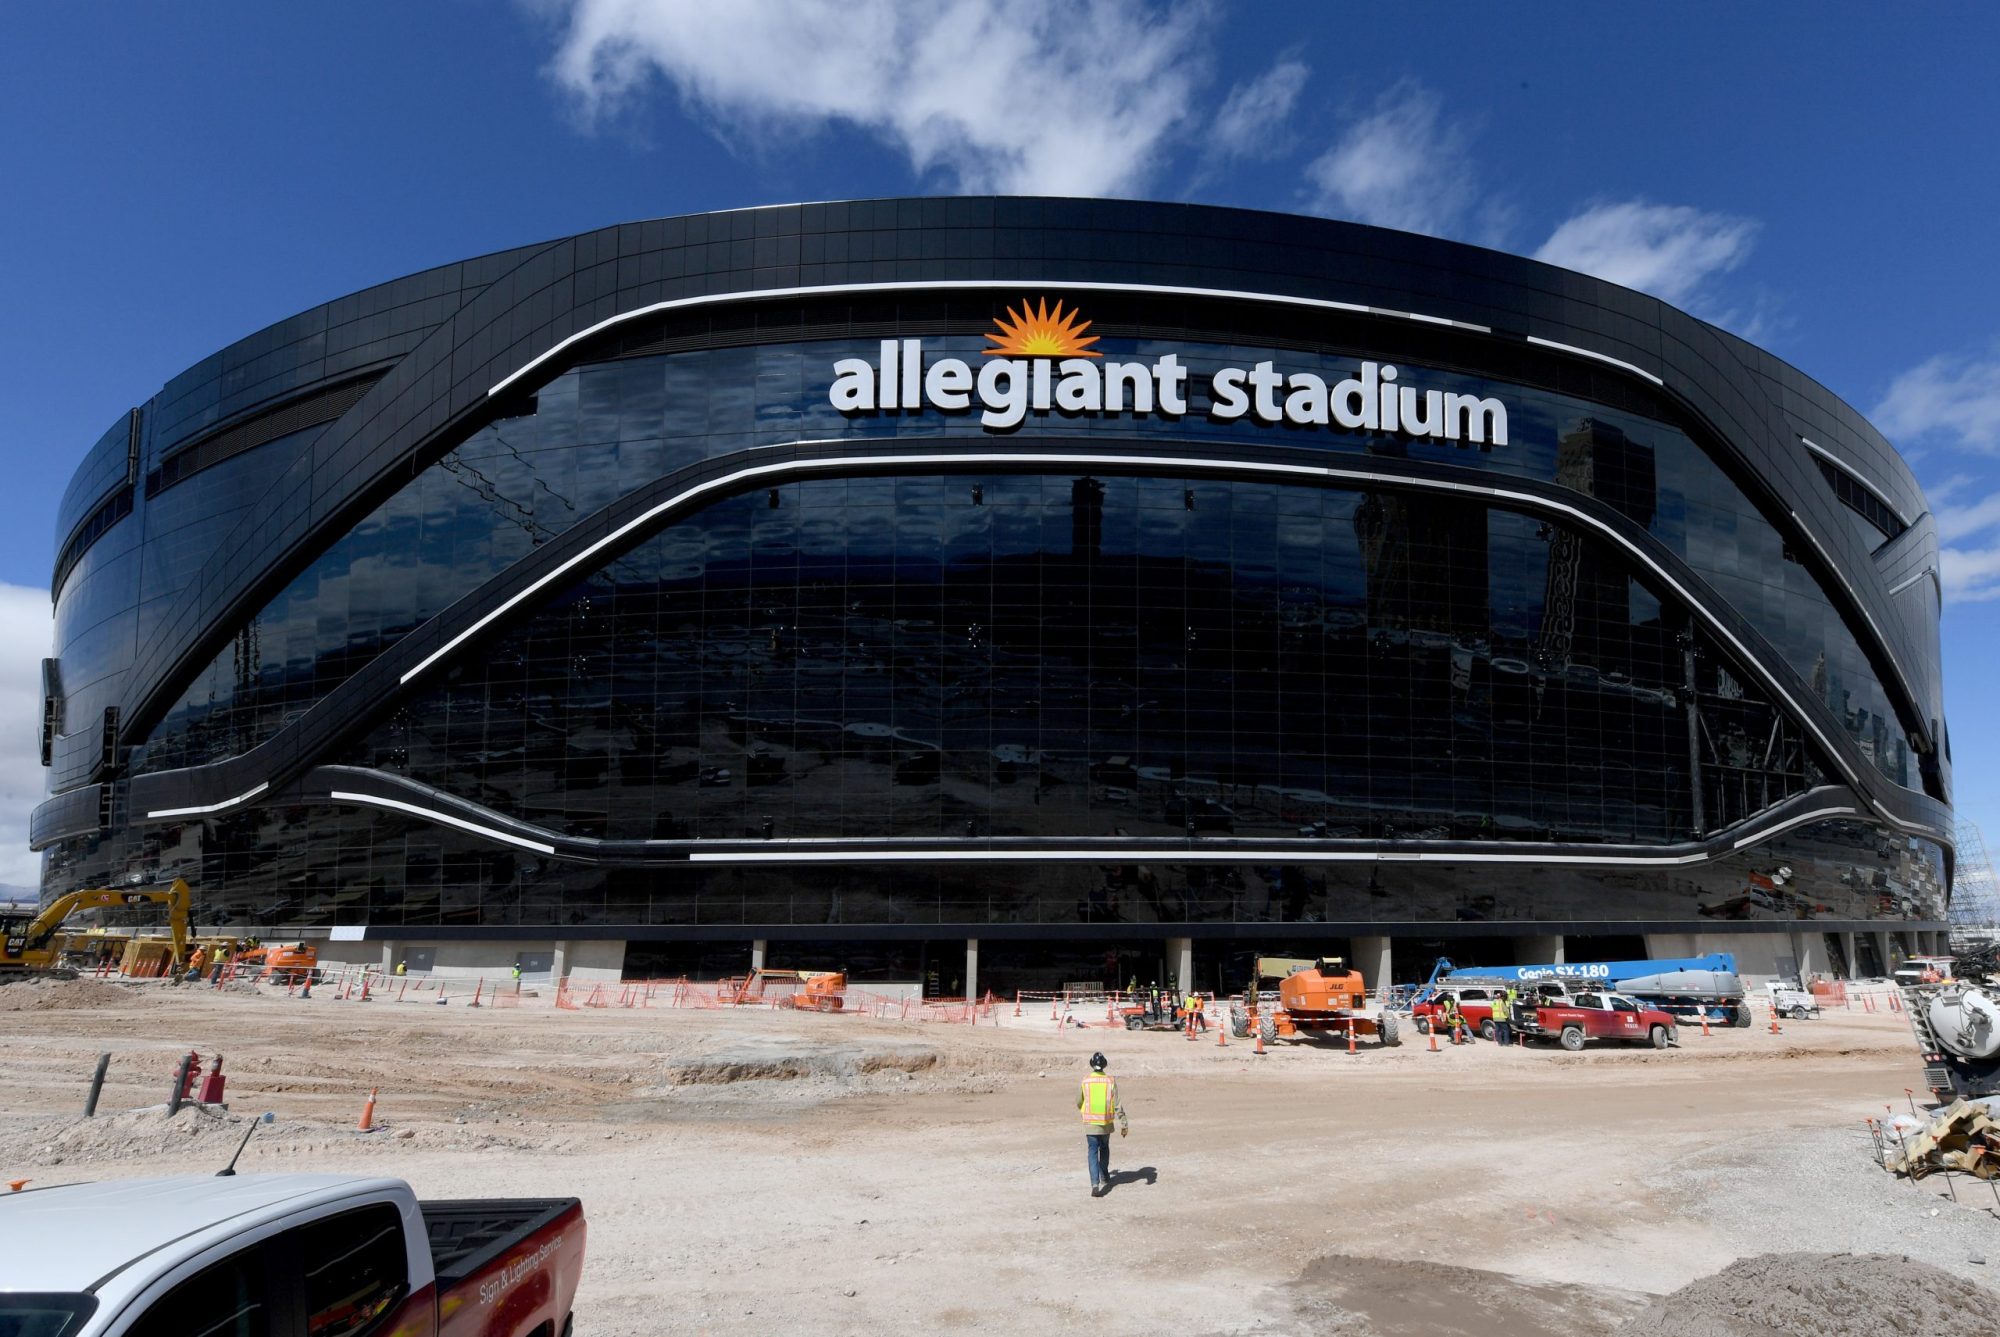 Construction continues at Allegiant Stadium, the USD 2 billion, glass-domed future home of the Las Vegas Raiders on March 17, 2020 in Las Vegas, Nevada. Photo by Ethan Miller/Getty Images